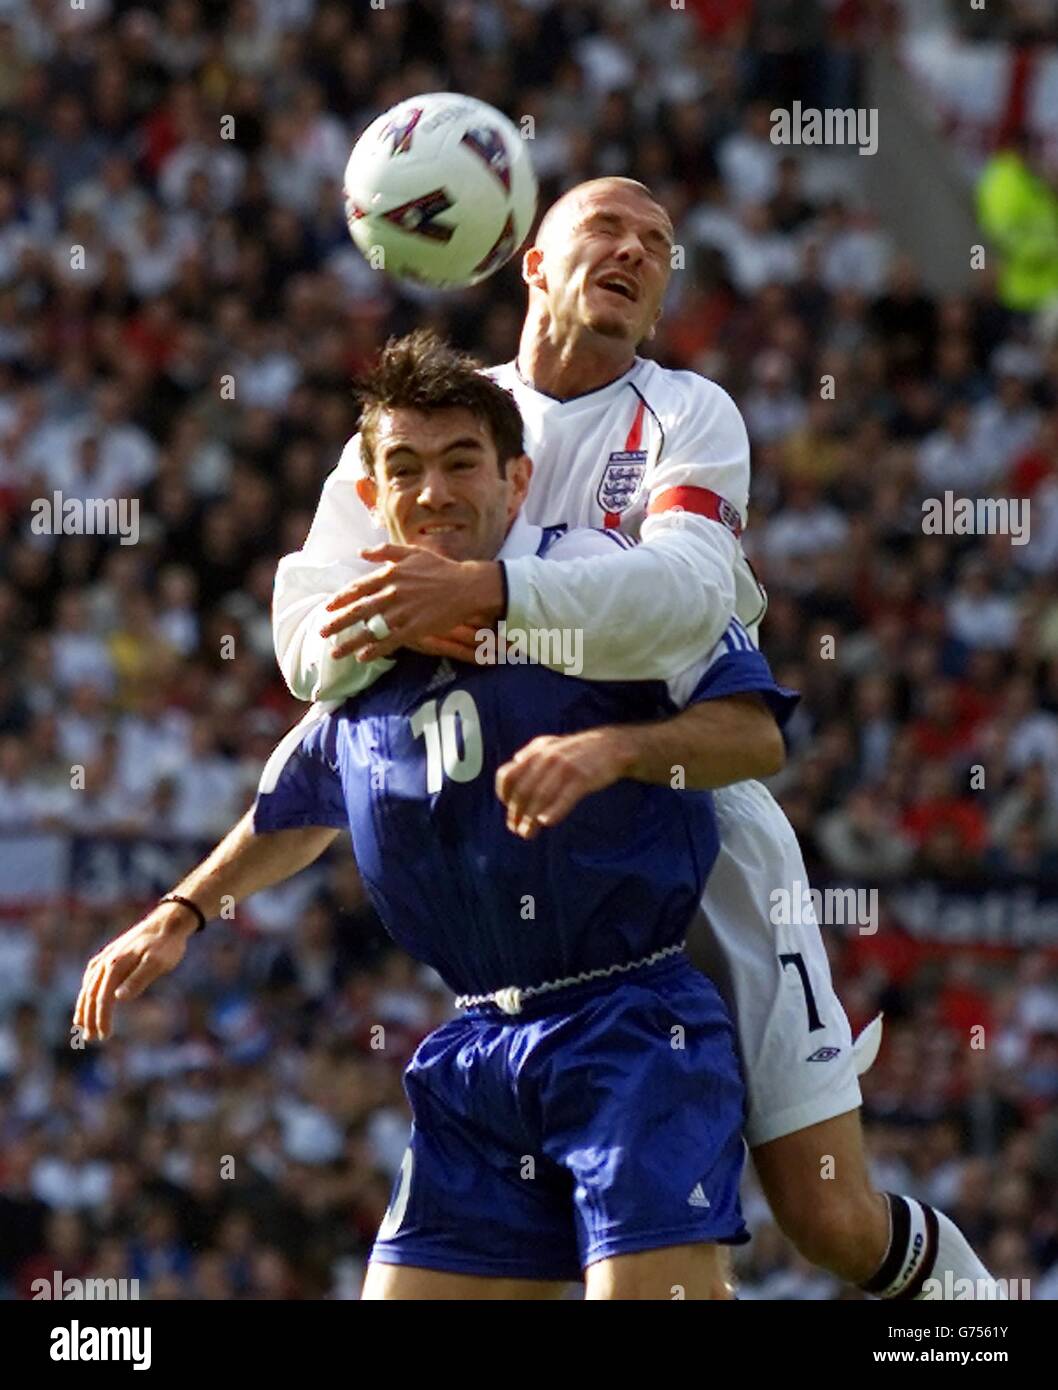 England Captain David Beckham grapples with Greece's Giorgos Karagounis during the FIFA World Cup European Qualifying Group Nine match at Old Trafford, Manchester. eg Stock Photo